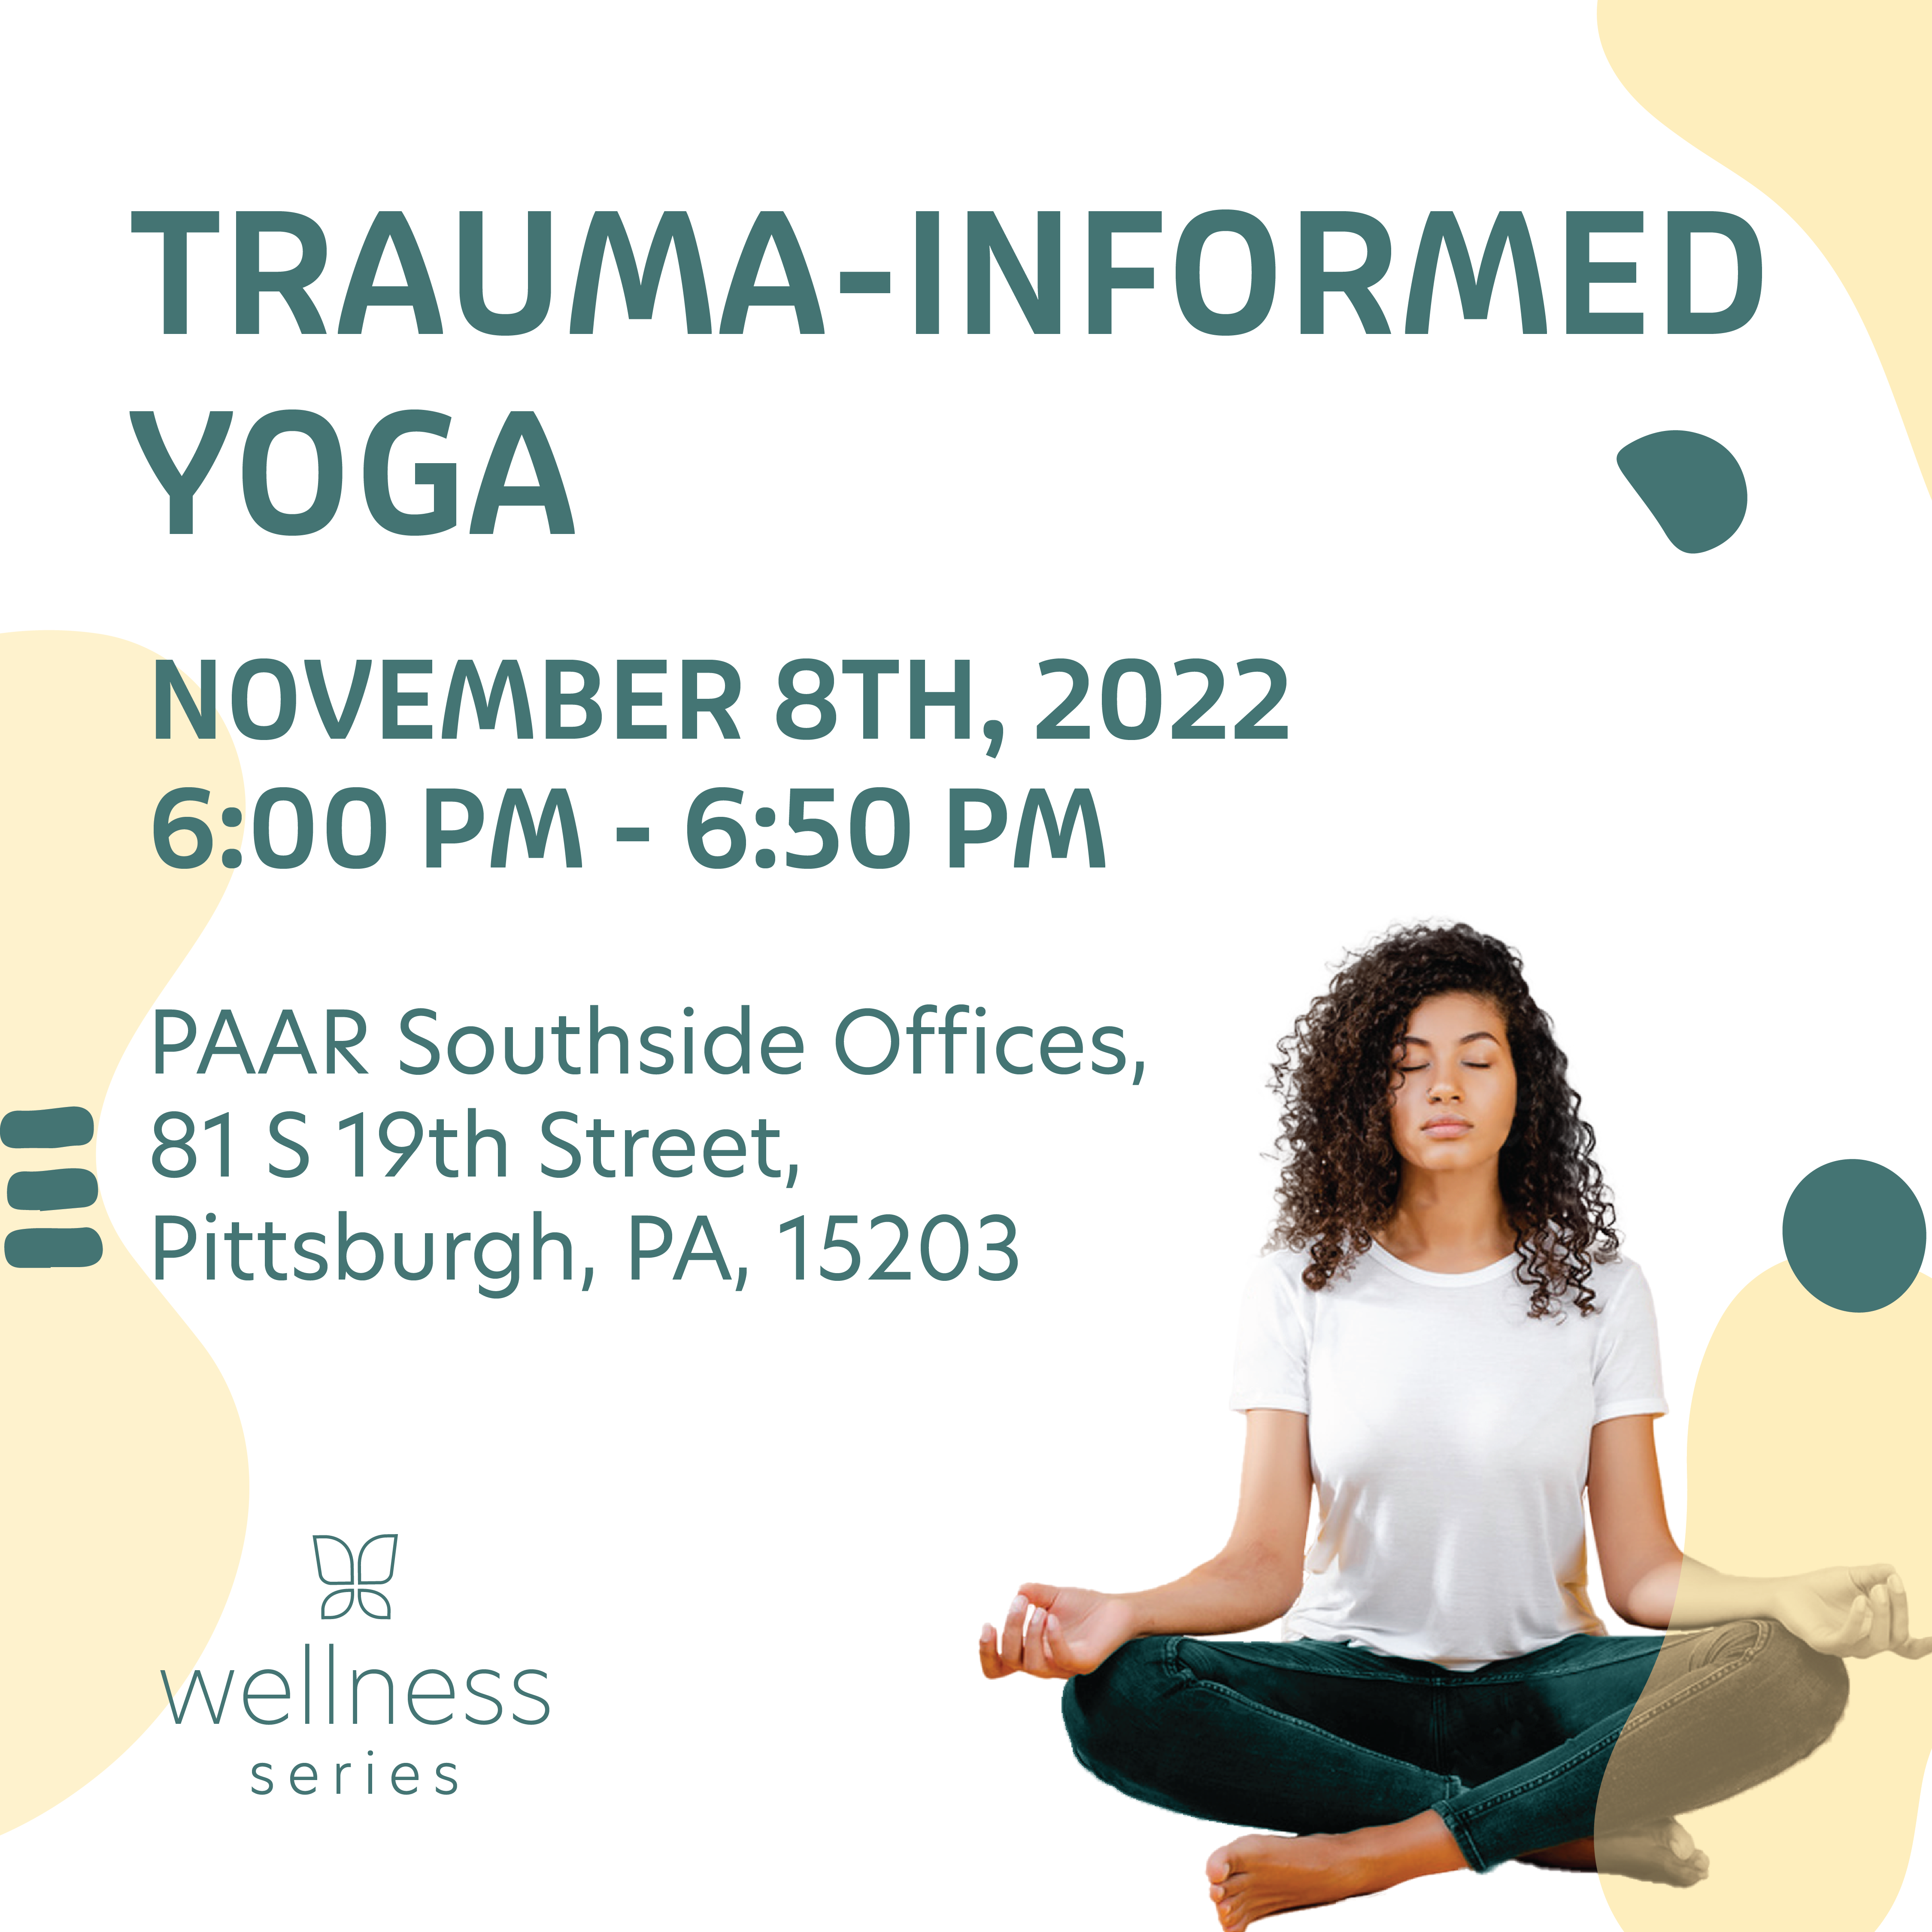 Trauma-Informed Yoga November 8th, 2022 6:00 PM - 6:50 PM PAAR Southside Offices, 81 S 19th Street, Pittsburgh, PA, 15203